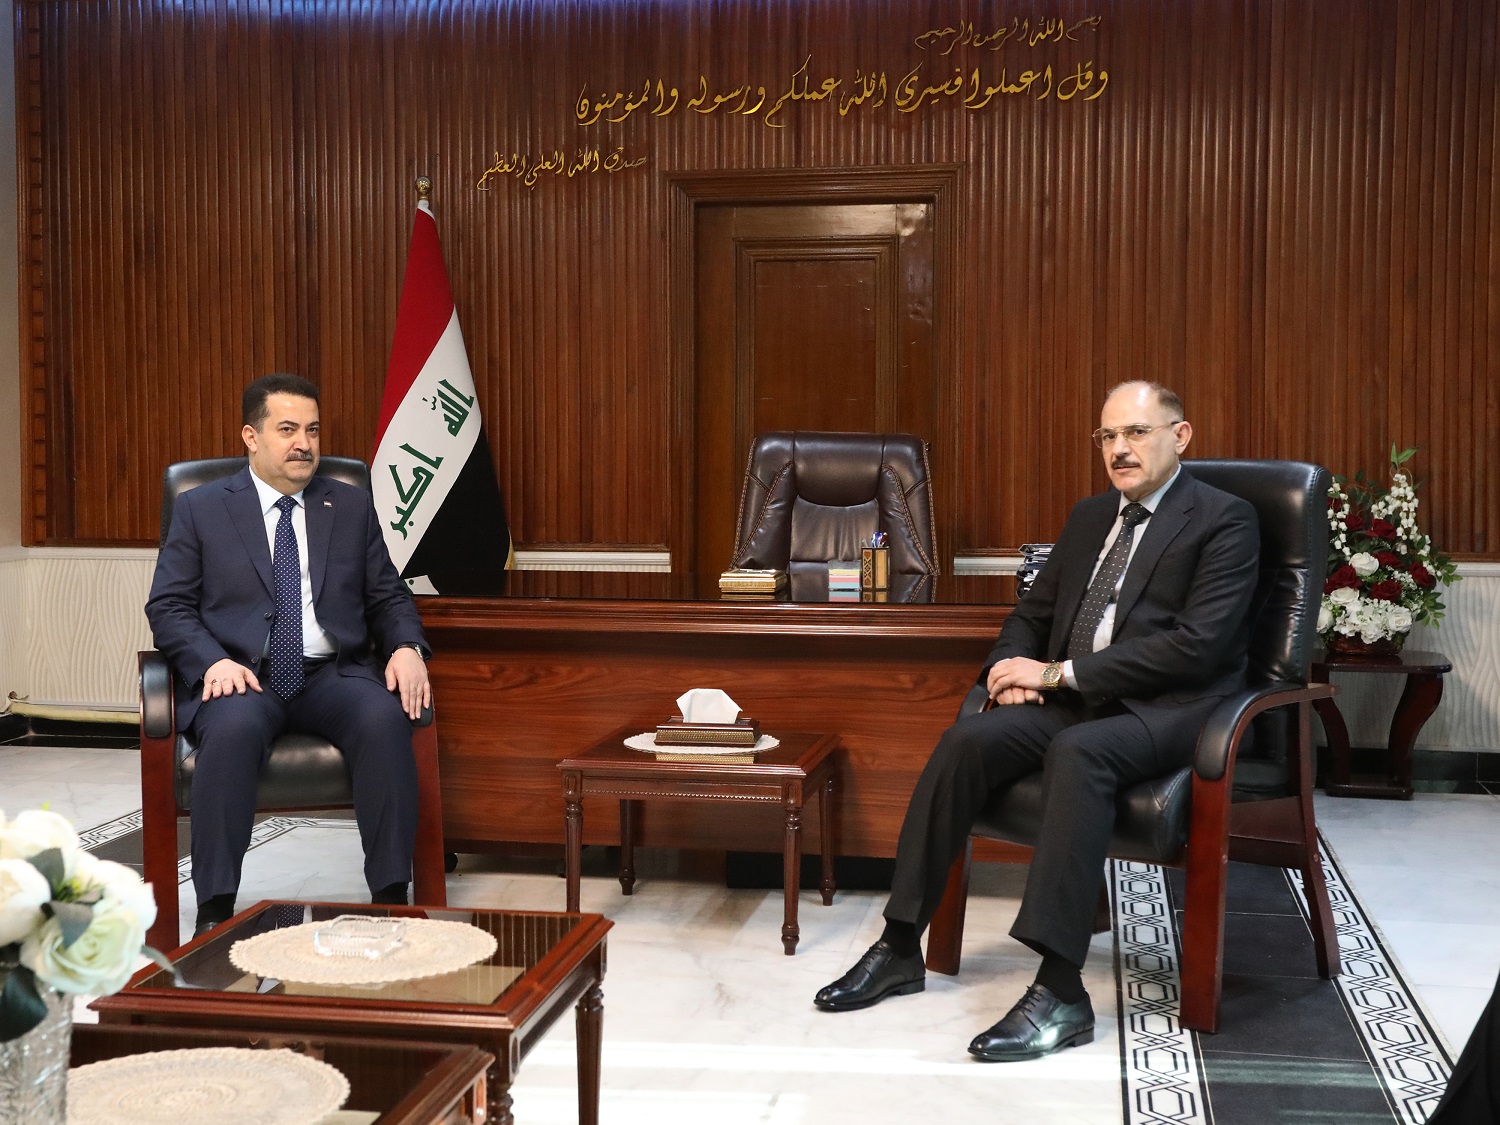 The President of the Federal Supreme Court receives the Prime Minister